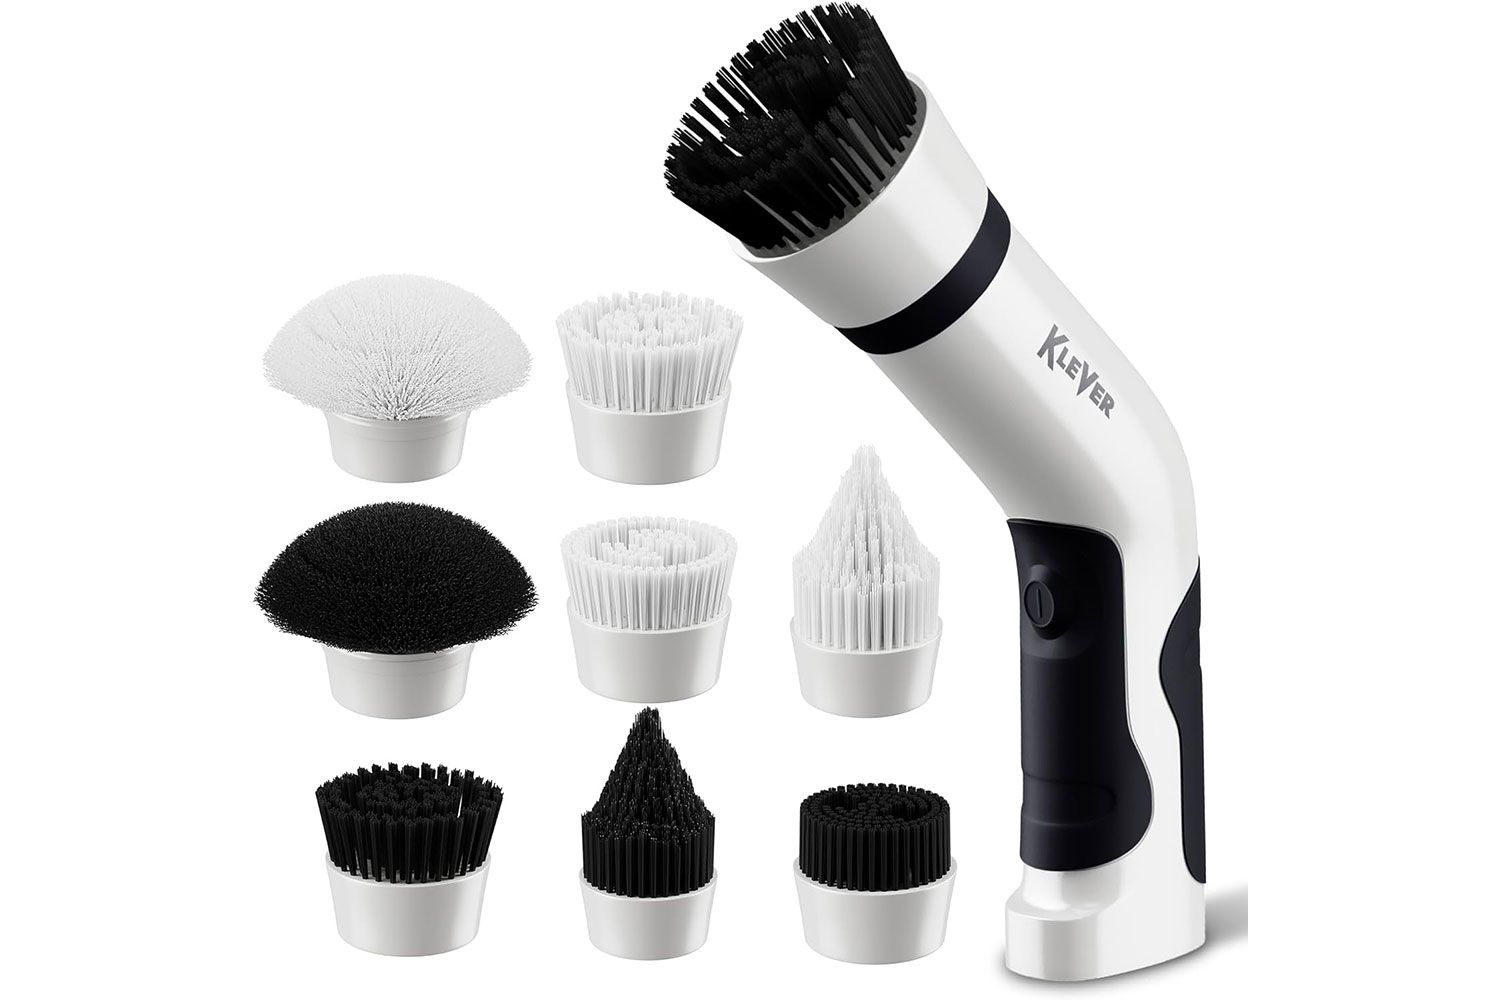 Klever Electric Spin Scrubber with 8 Brushes